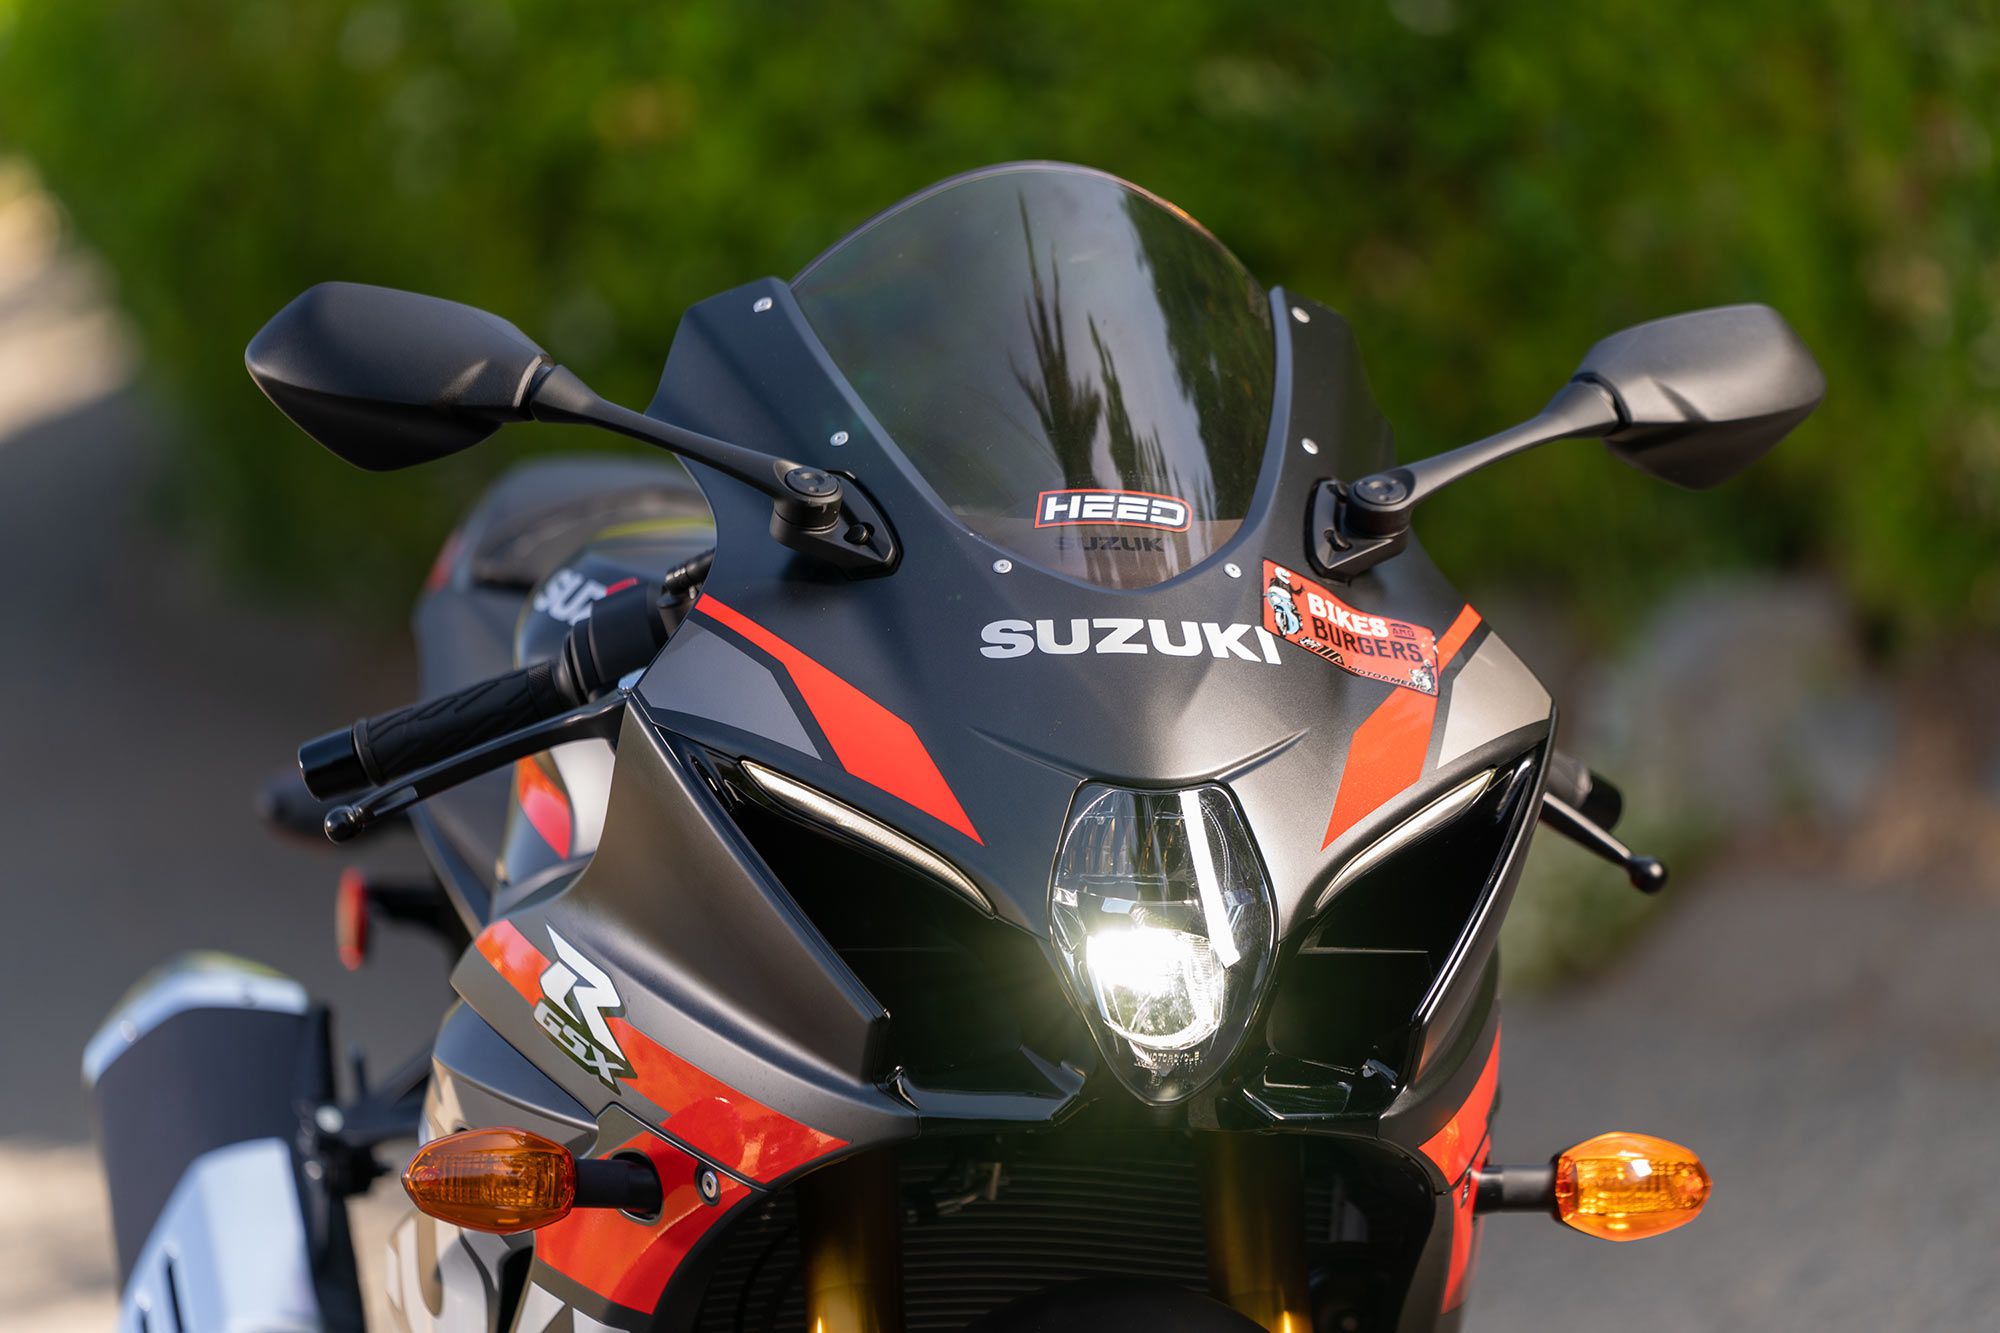 The GSX-R1000R also gets LED positioning lights above both ram air intakes.